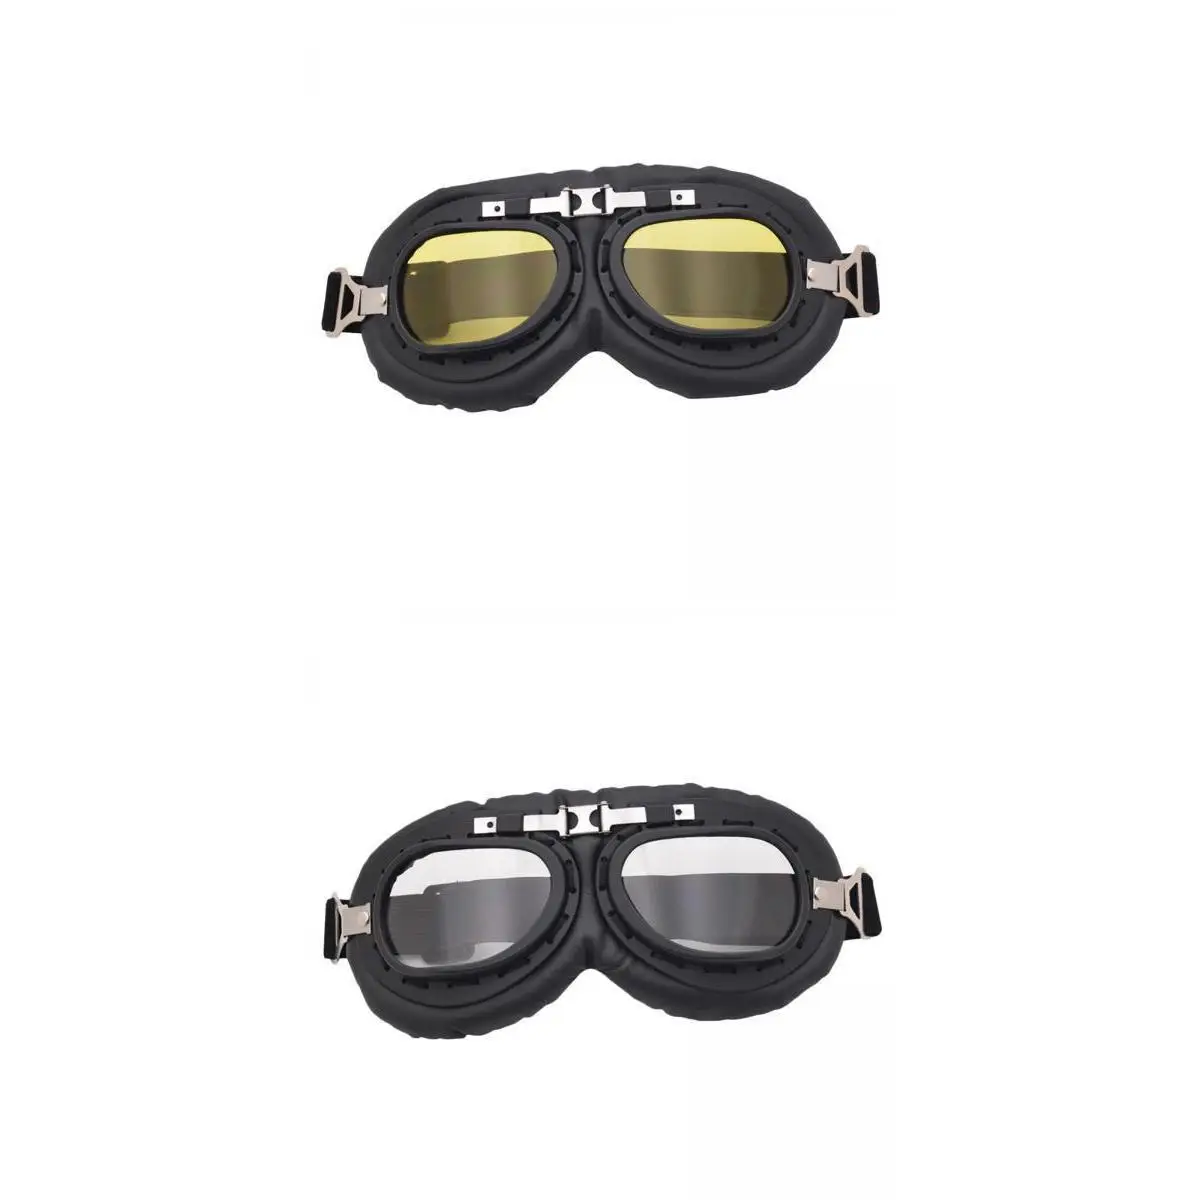 2Pcs Motorcycle Goggles Anti Scratch Dust Proof for Touring Riding ATV